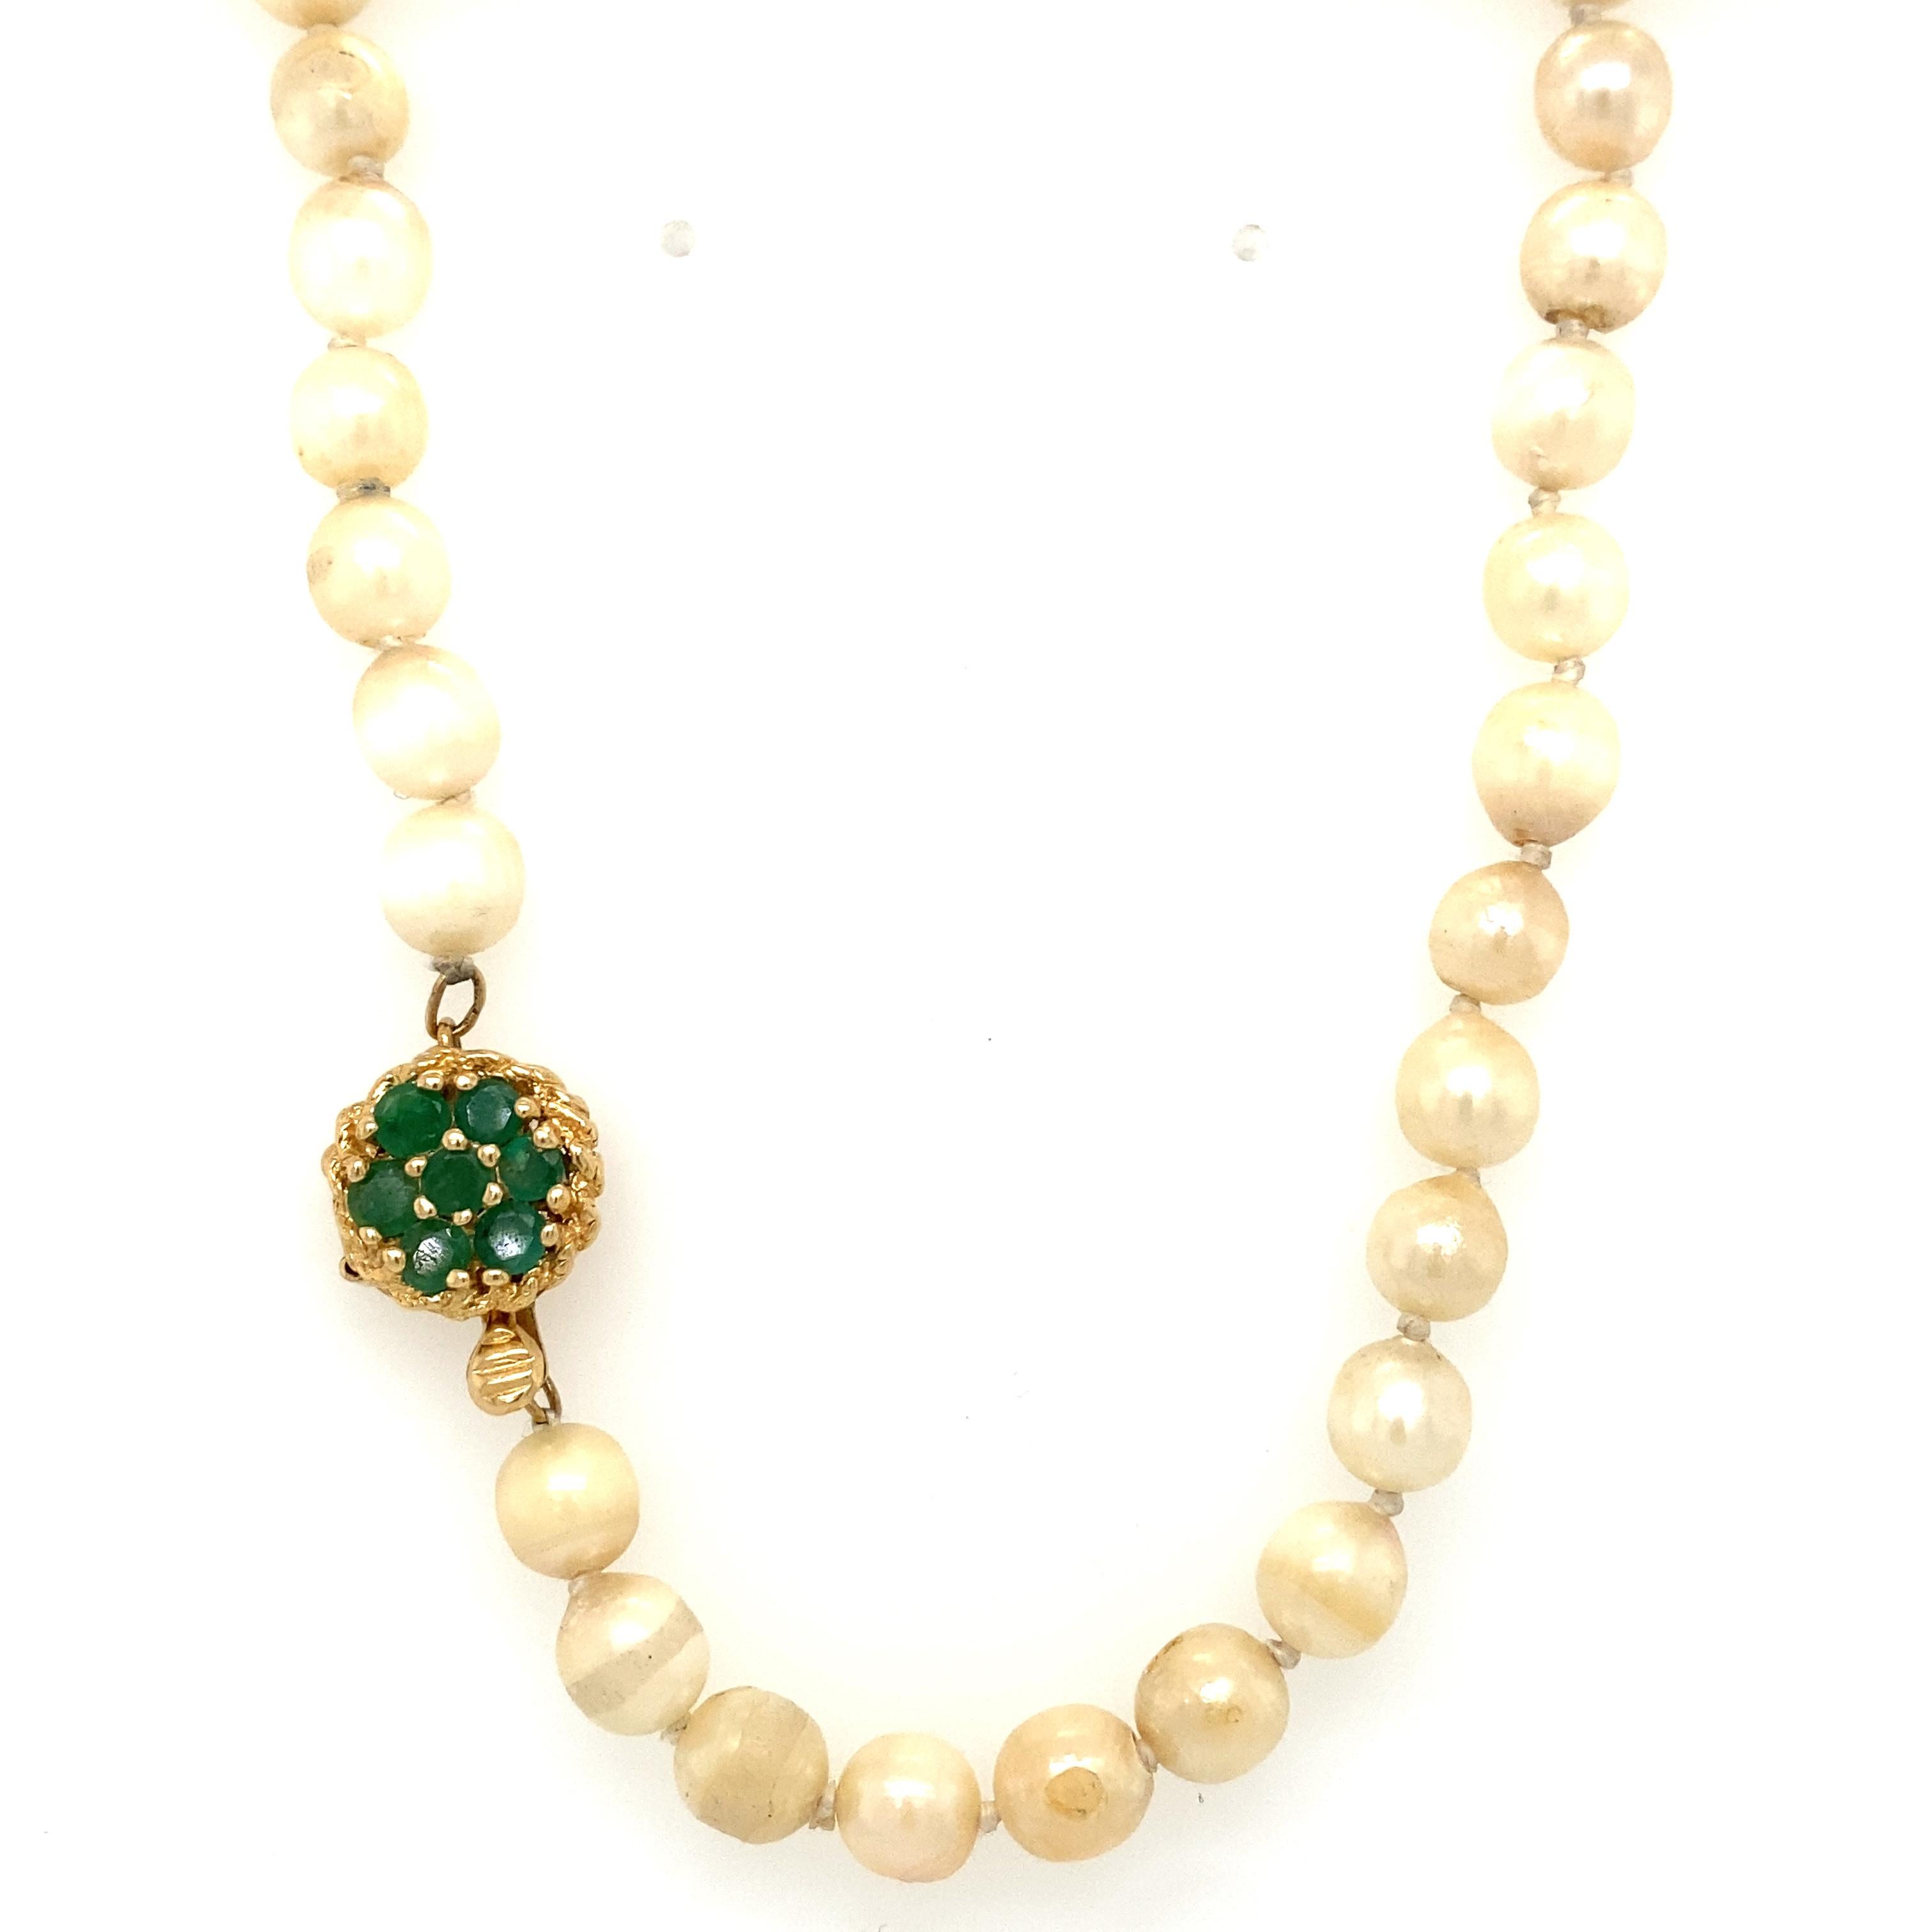 Item Details: This choker-length pearl strand has a clasp with vibrant green emeralds. It is a beautiful vintage piece that makes an excellent gift.

Circa: 1960s
Metal Type: 14 Karat Yellow gold
Weight: 19.7 grams
Size: 15.5